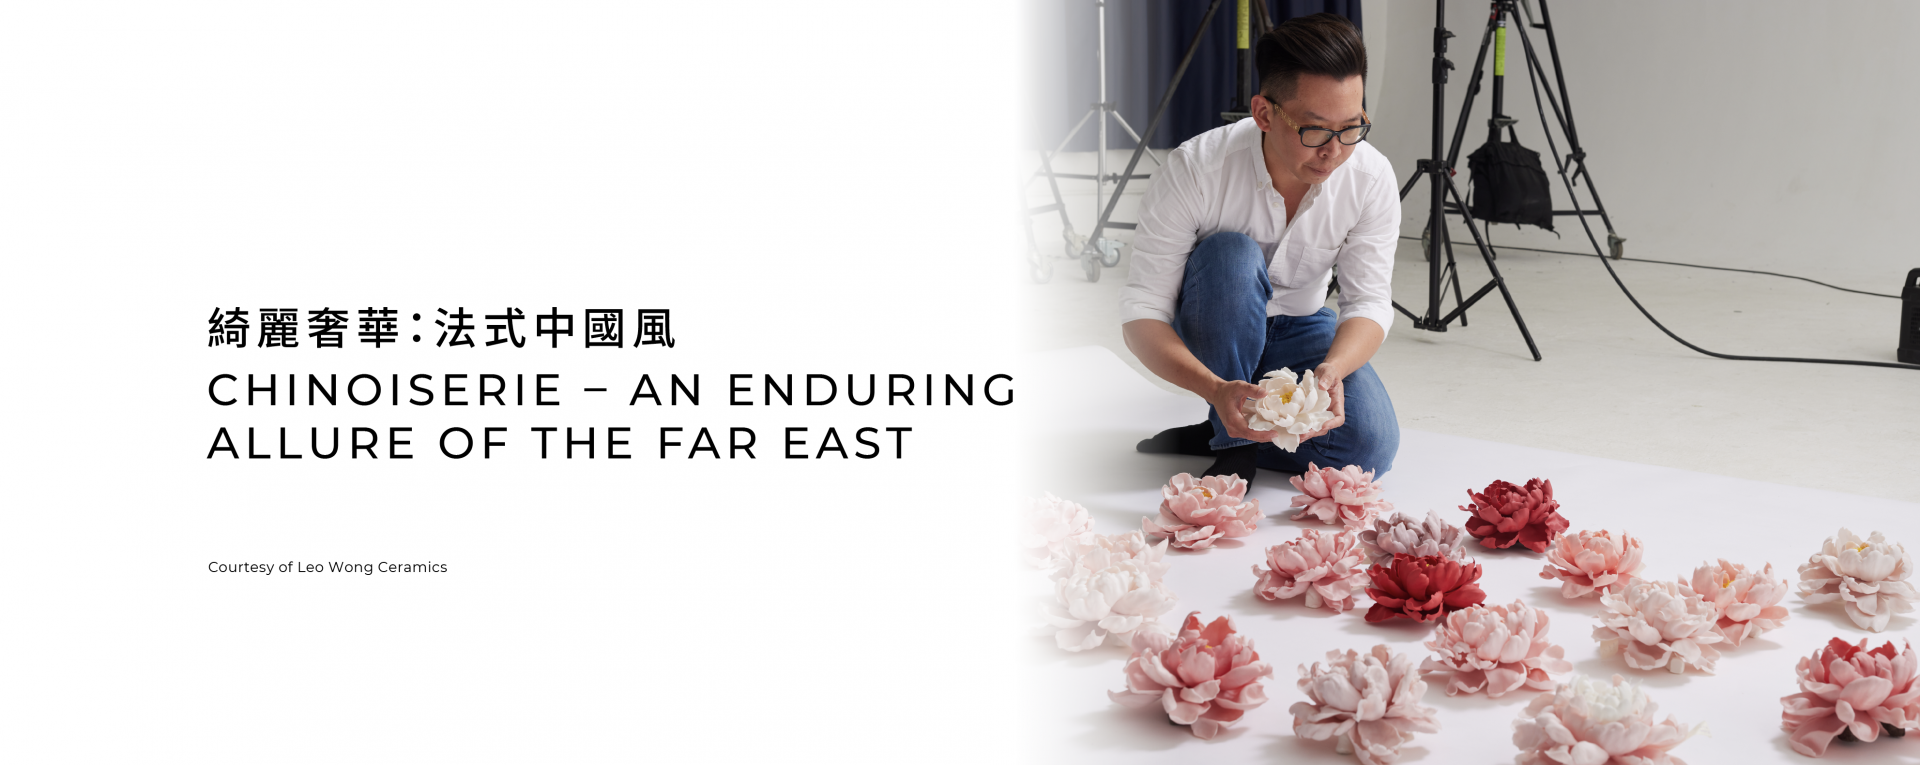 Chinoiserie – An enduring allure of the Far East – Leo Wong Ceramics Exhibition